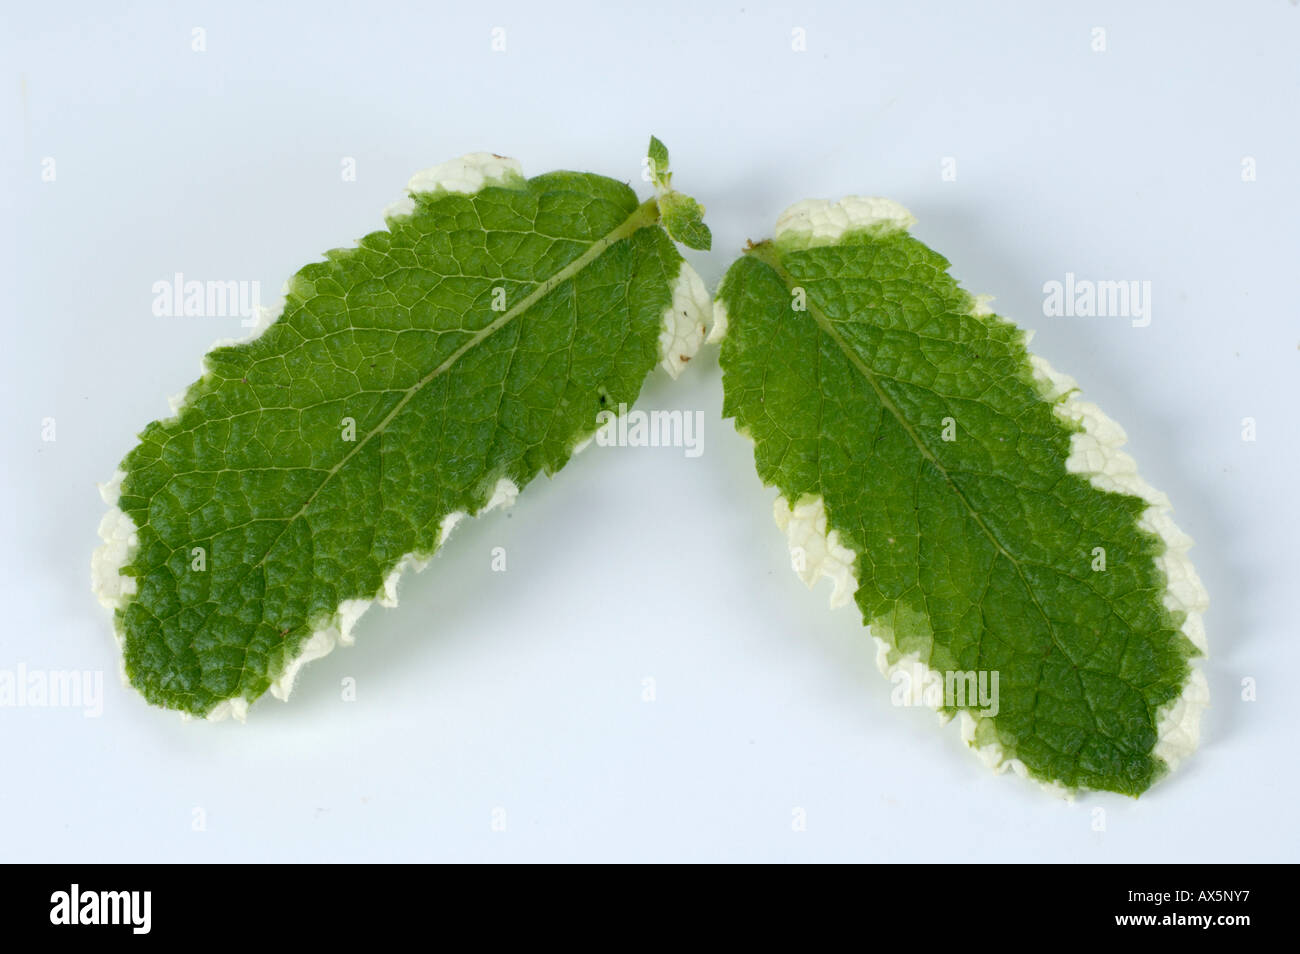 Apple Mint / Round-leaved Mint  Stock Photo